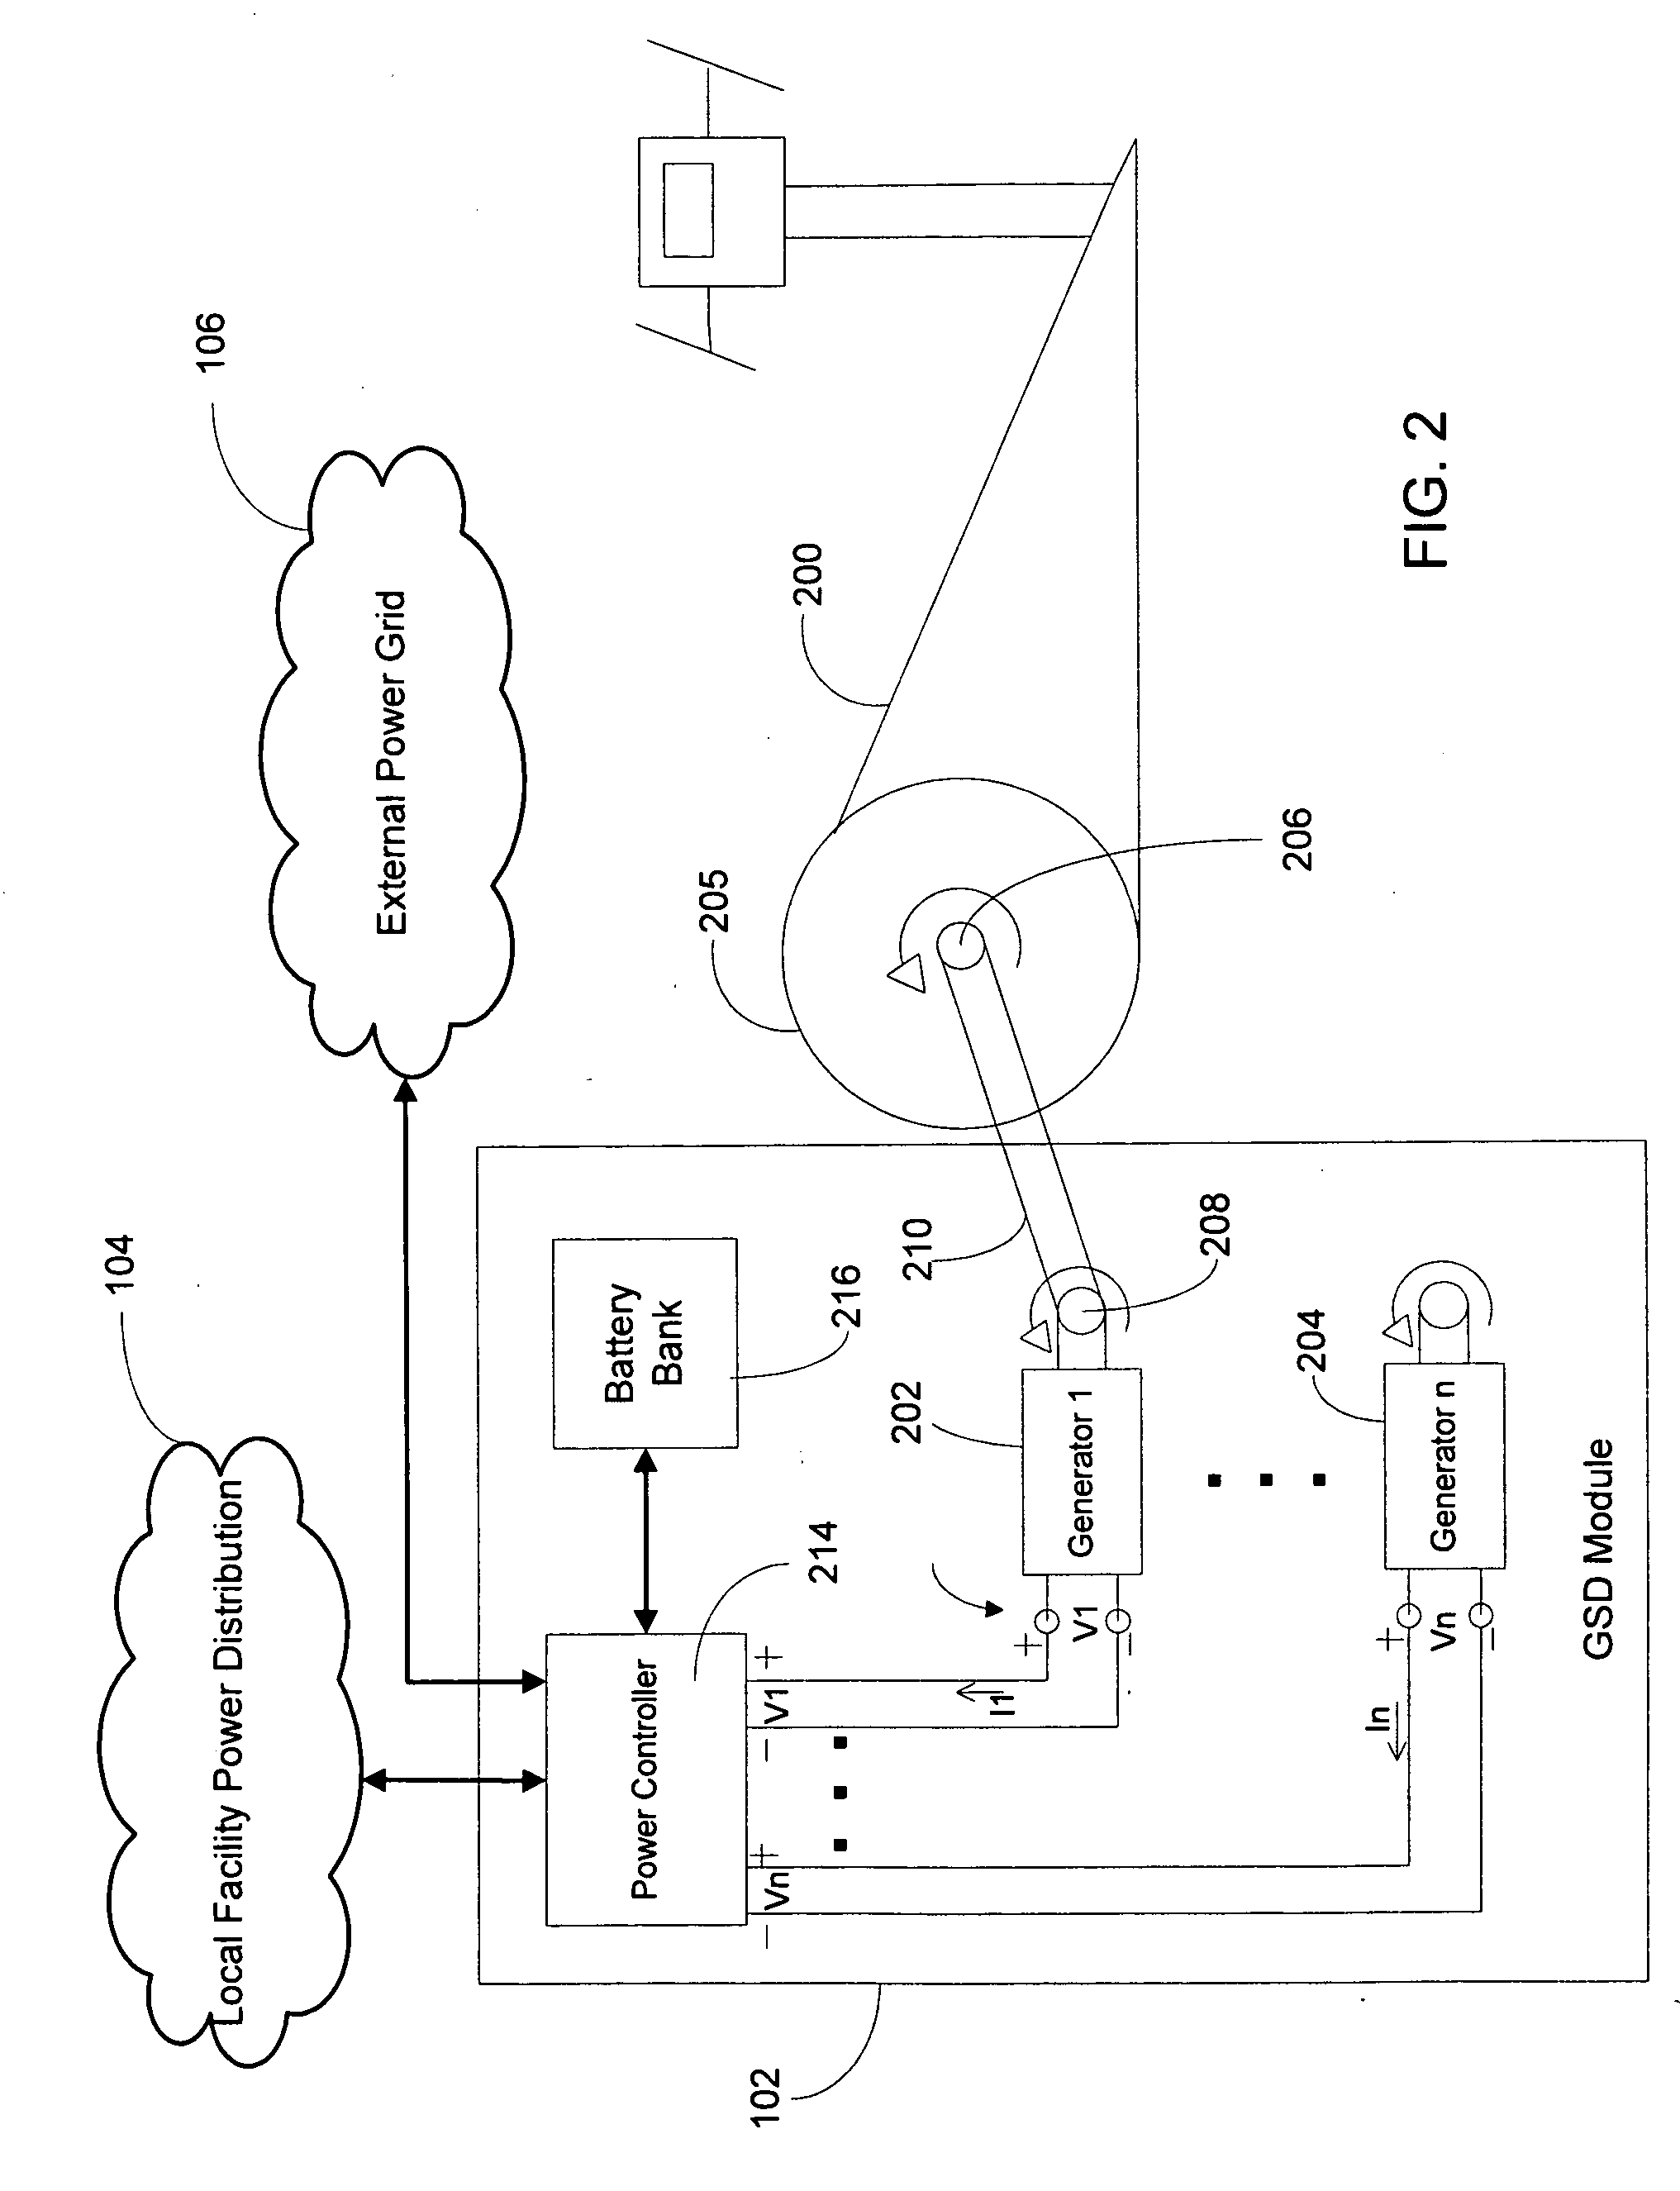 System and Method for Harnessing and Distributing Normally Wasted Human Energy